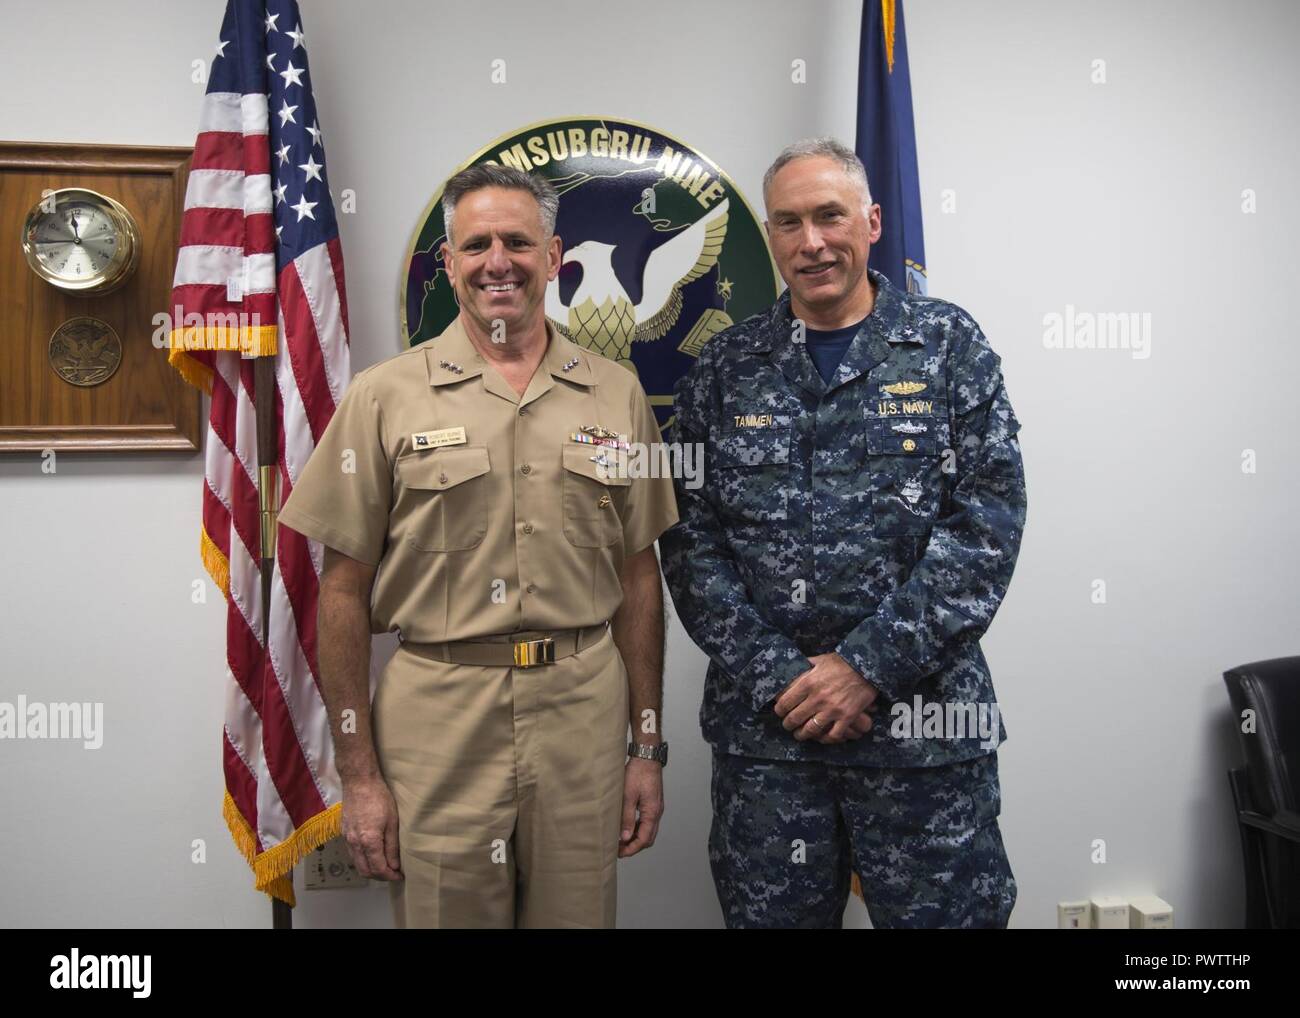 BANGOR, Wash. (June 22, 2017) Chief of Naval Personnel Vice Adm. Robert Burke meets with Rear Adm. John Tammen, commander, Submarine Group 9, while visiting Naval Base Kitsap (NBK) Bangor. During his visit, he conducted four separate all hands calls at NBK Bangor and NBK Bremerton to answer Sailor’s questions. ( Stock Photo